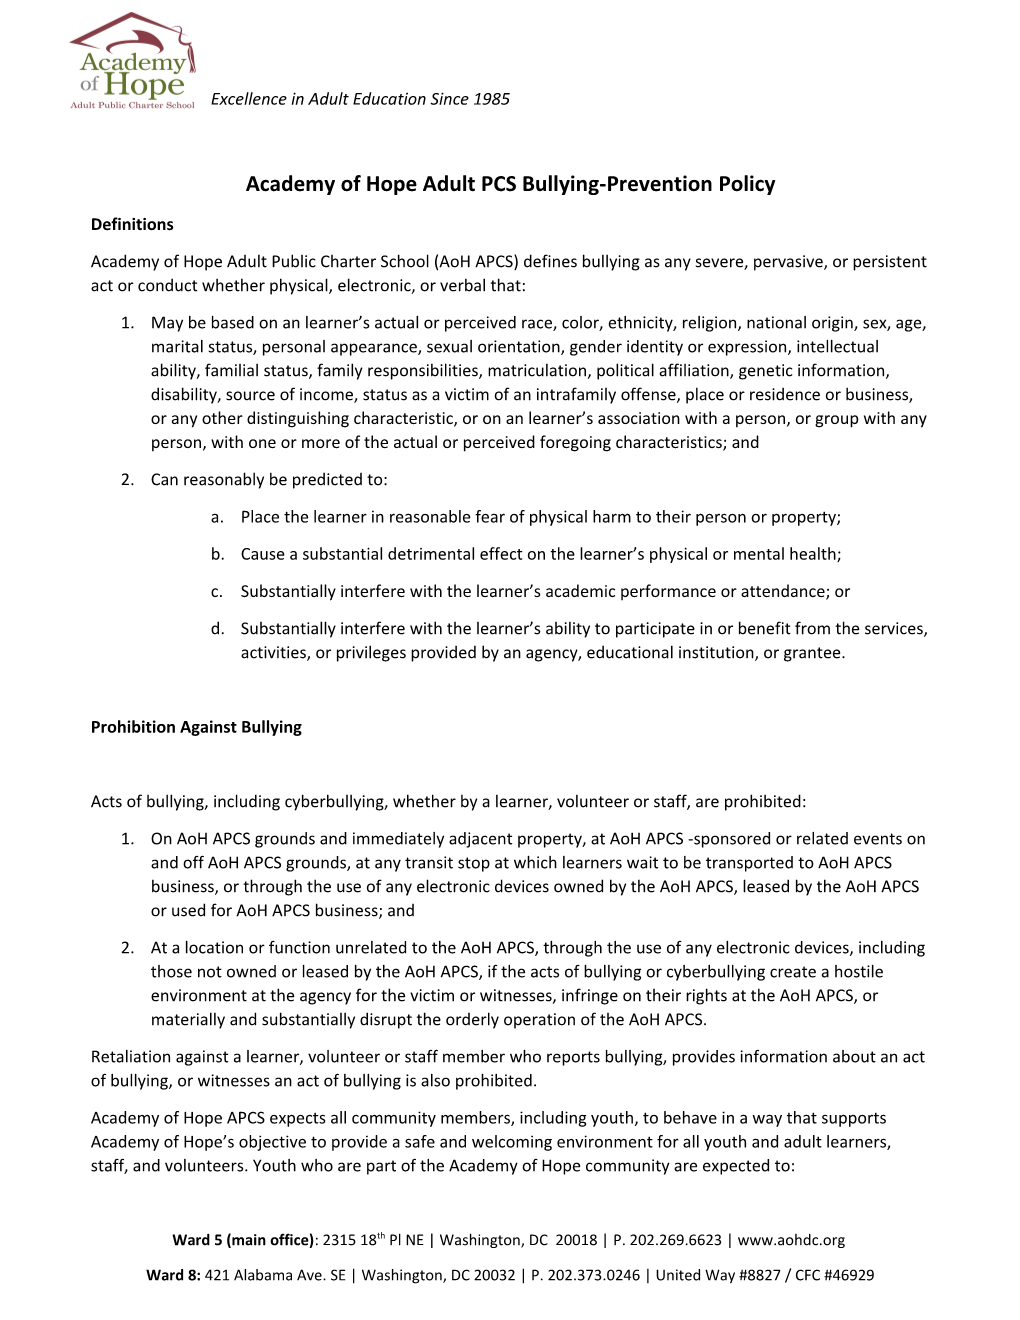 Academy of Hope Adult PCS Bullying-Prevention Policy